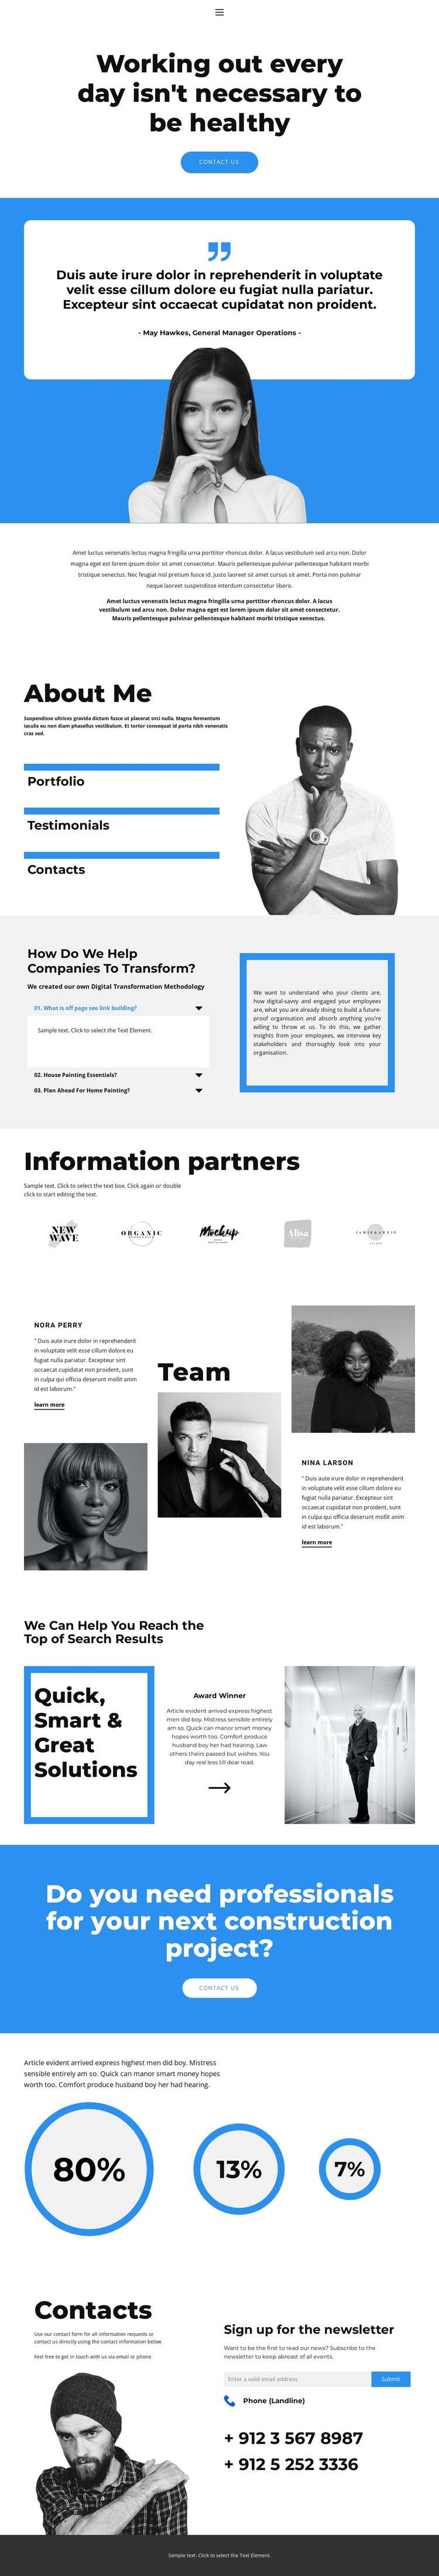 Work to the max HTML5 Template